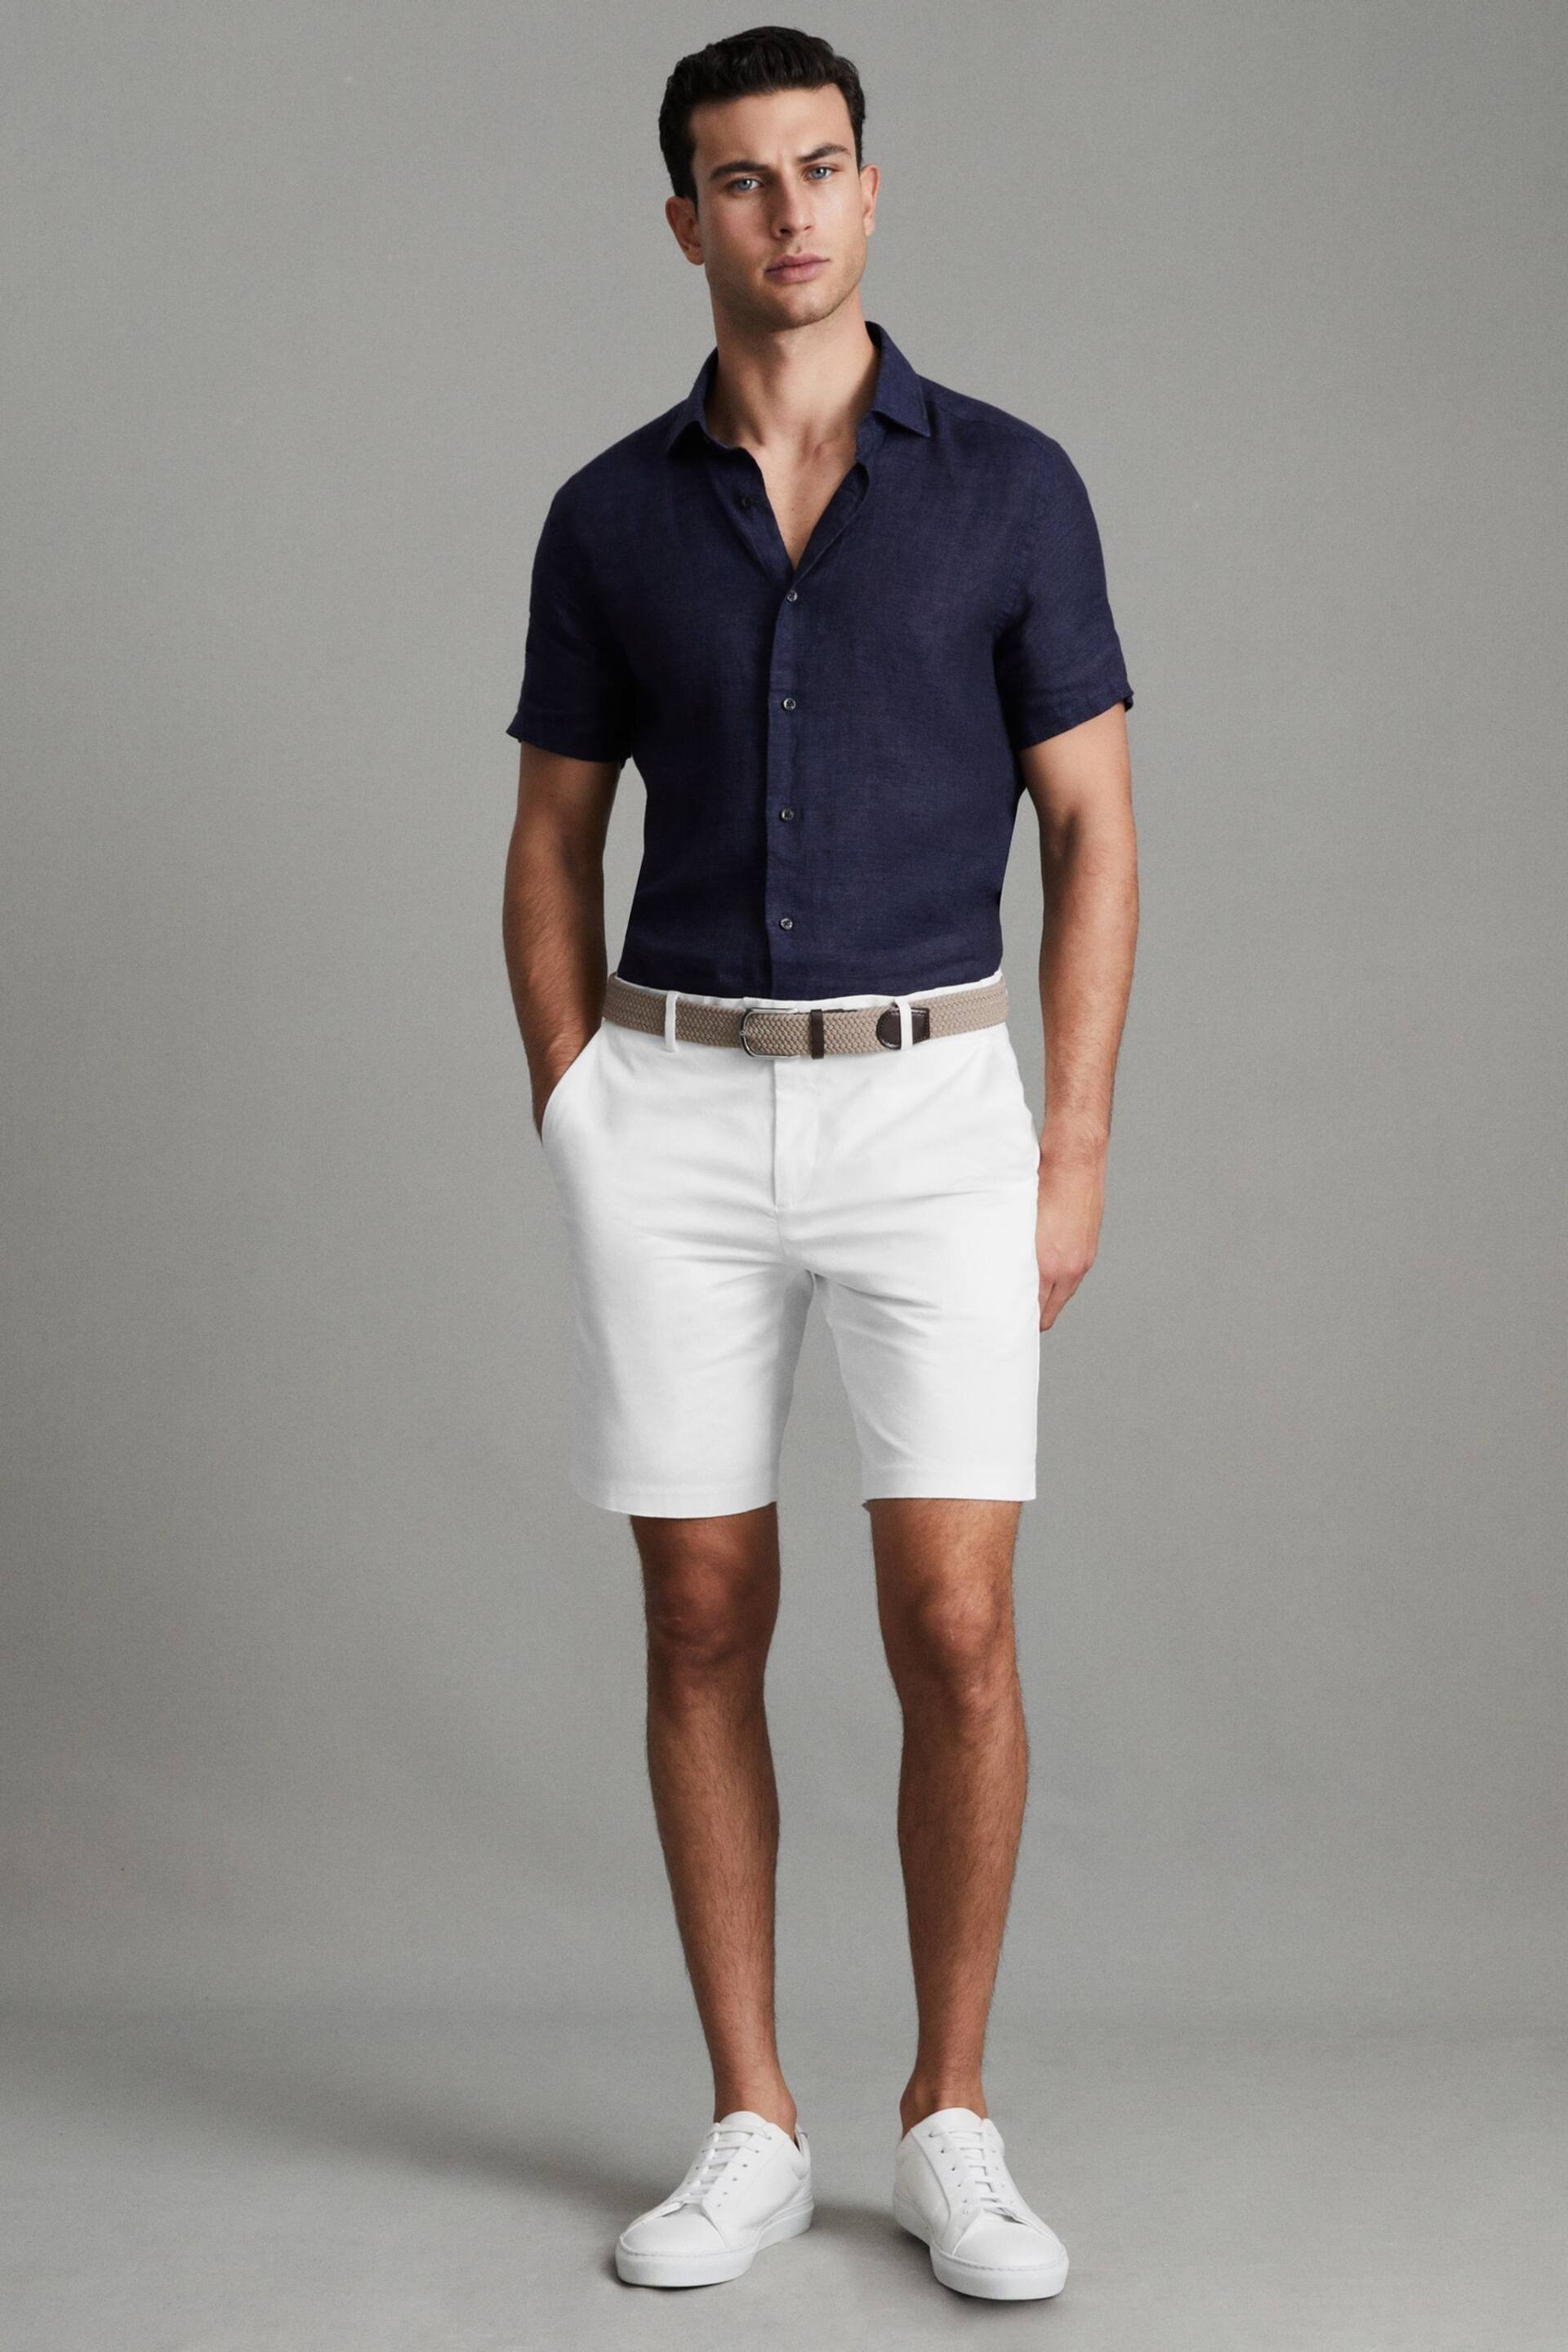 Reiss White Wicket Modern Fit Cotton Blend Chino Shorts - Image 3 of 6